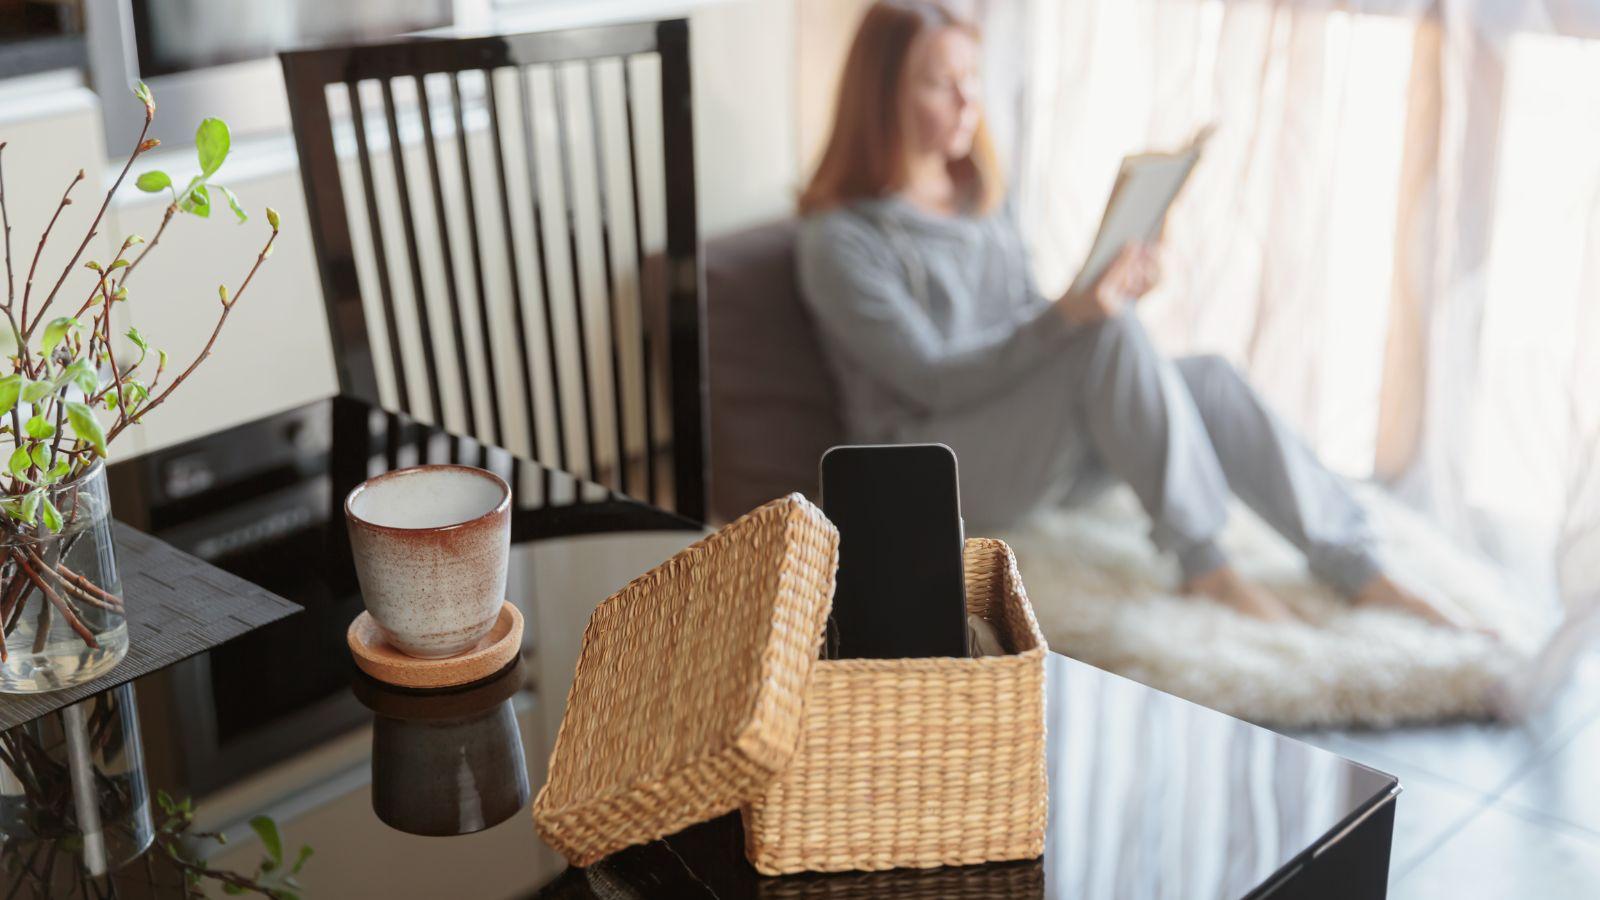 autumn self care tips digital detox, image of woman sitting in chair reading whilst her mobile phone is in a basket out of the way